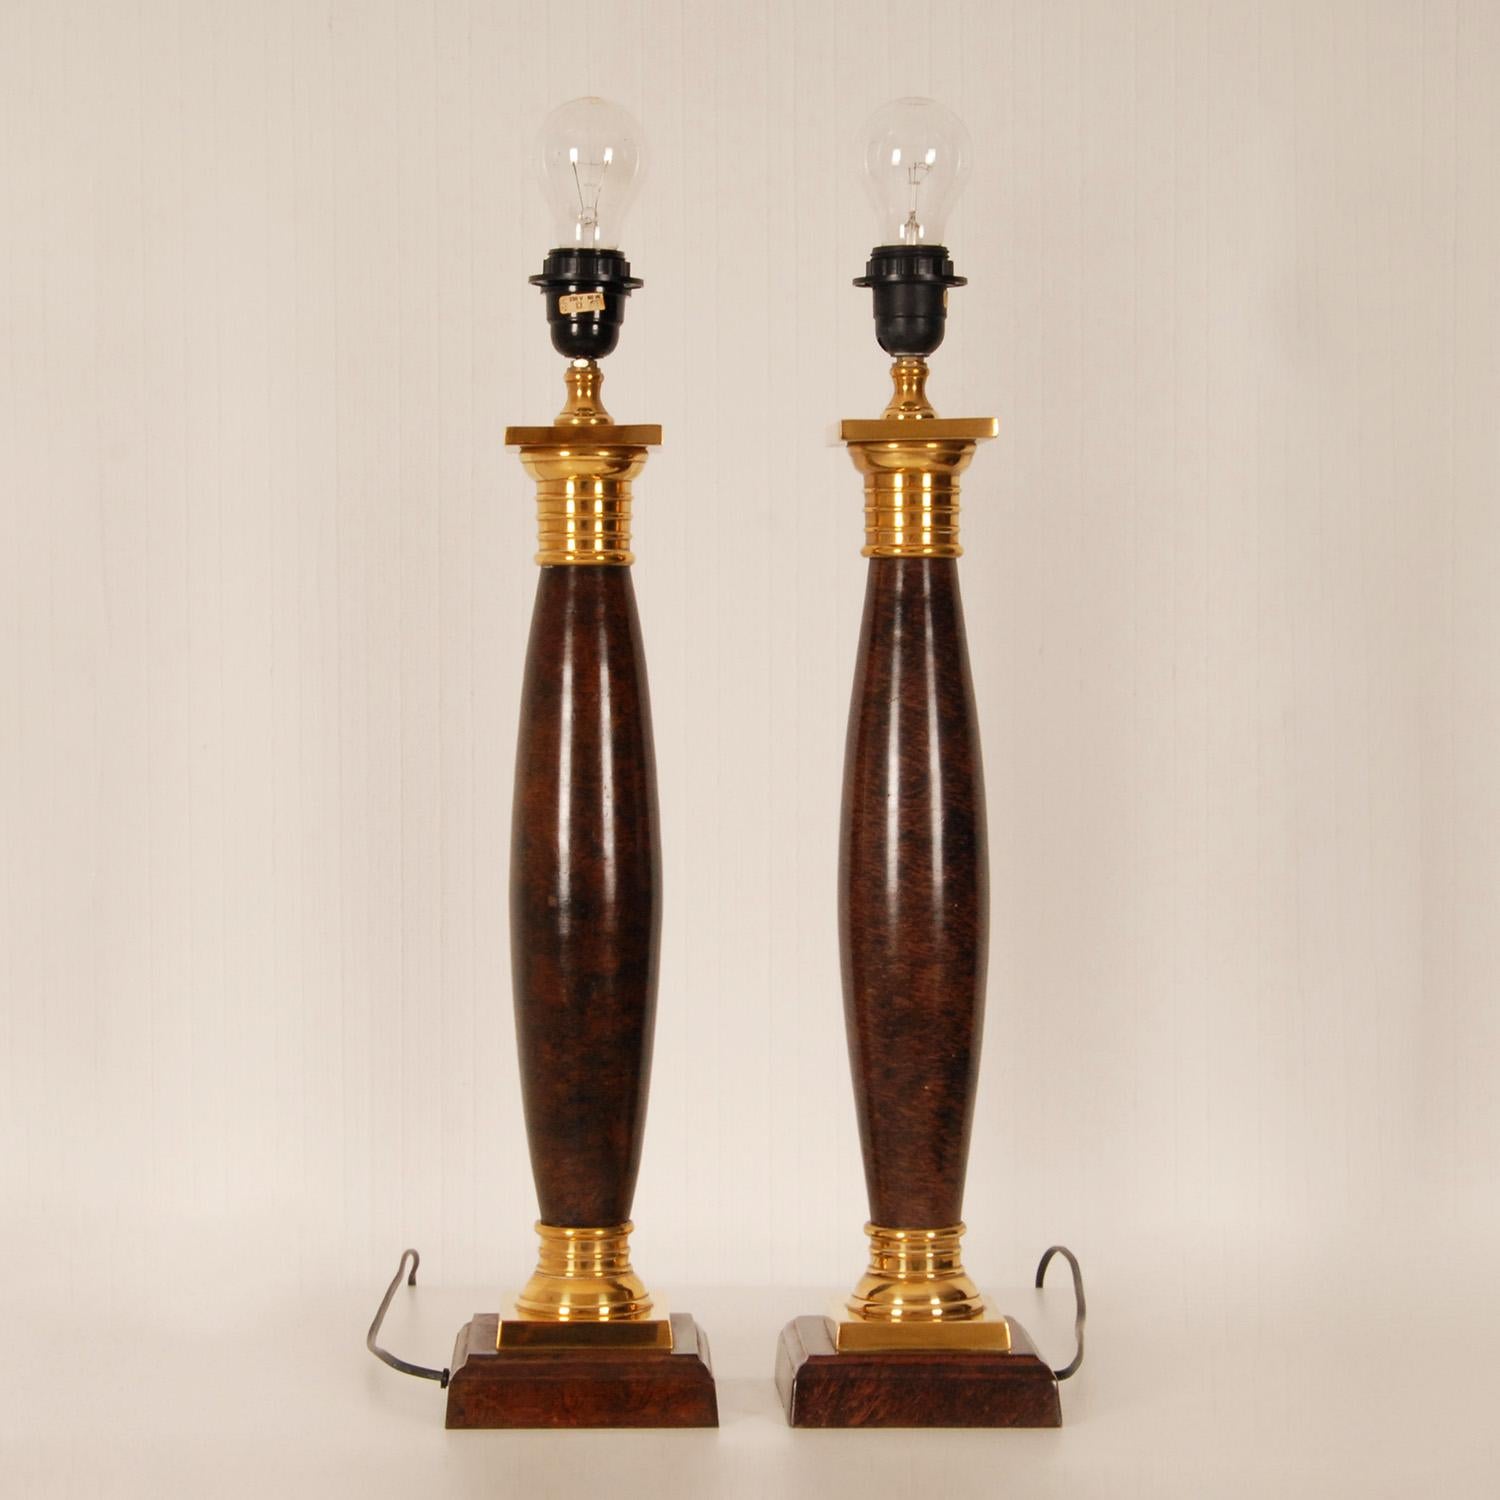 20th Century Vintage Napoleonic Column Table Lamps French Rosewood Gold Gilded Bronze, a Pair For Sale